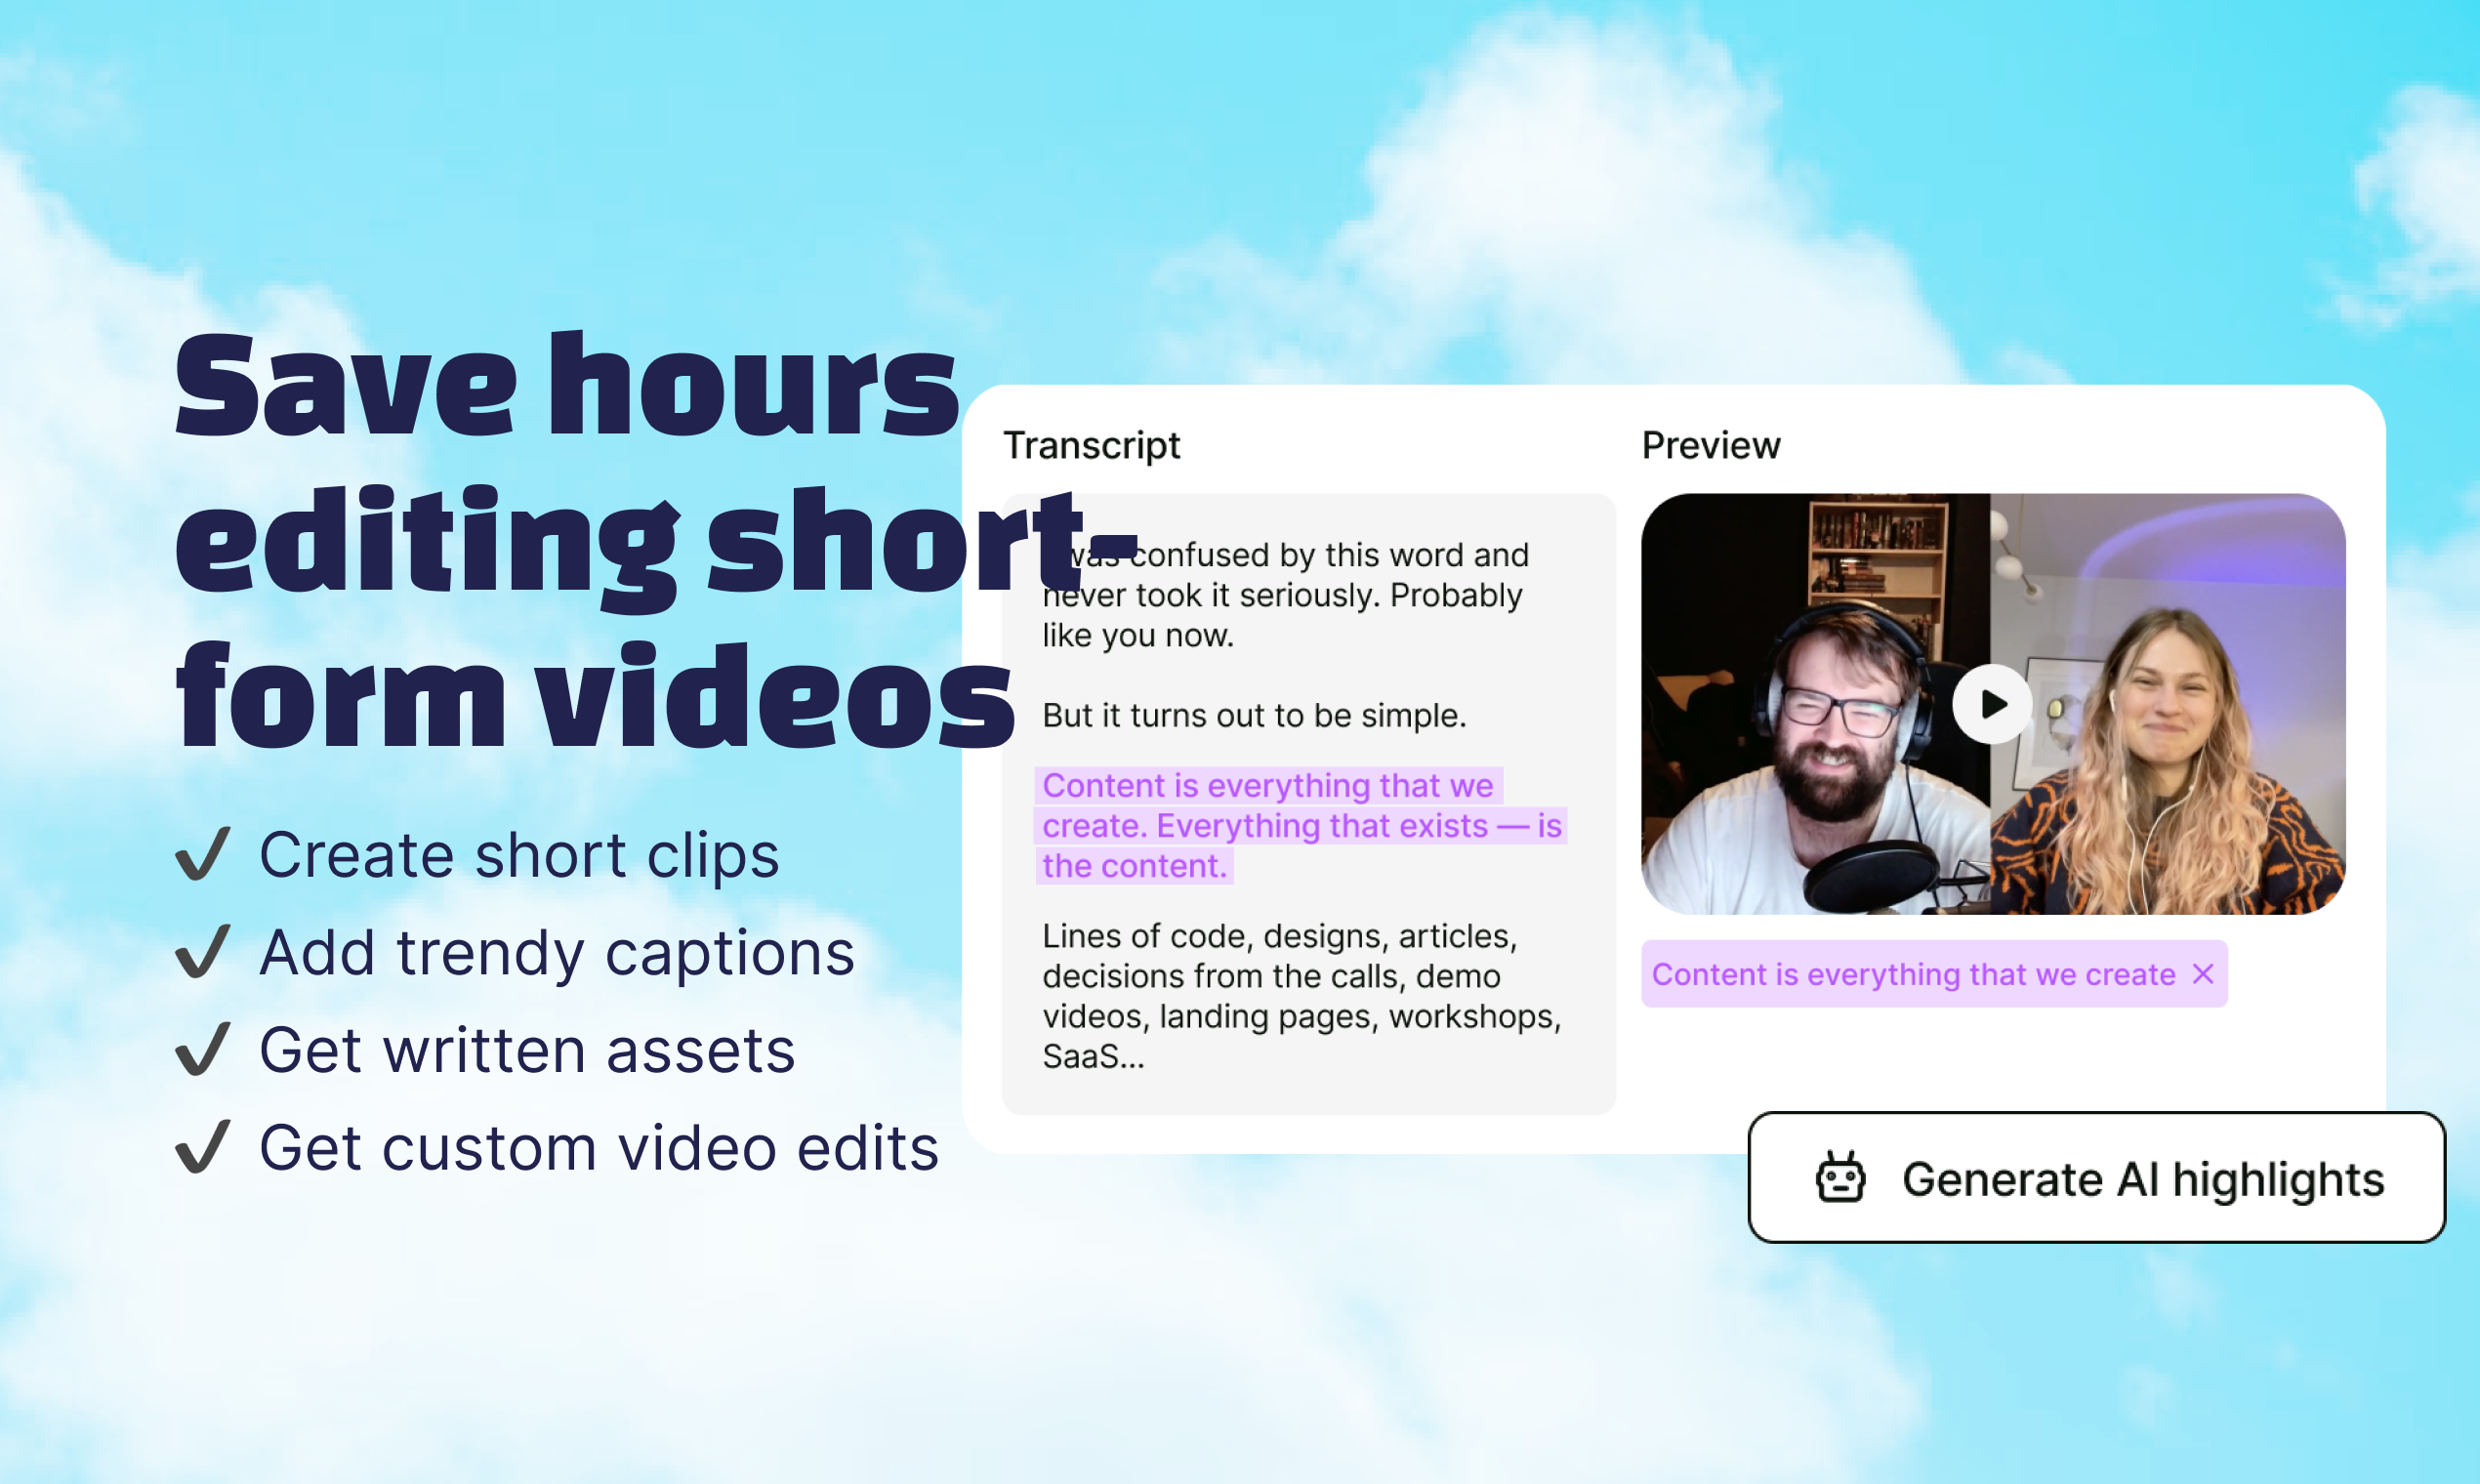 clipwing - Save days on producing better video content